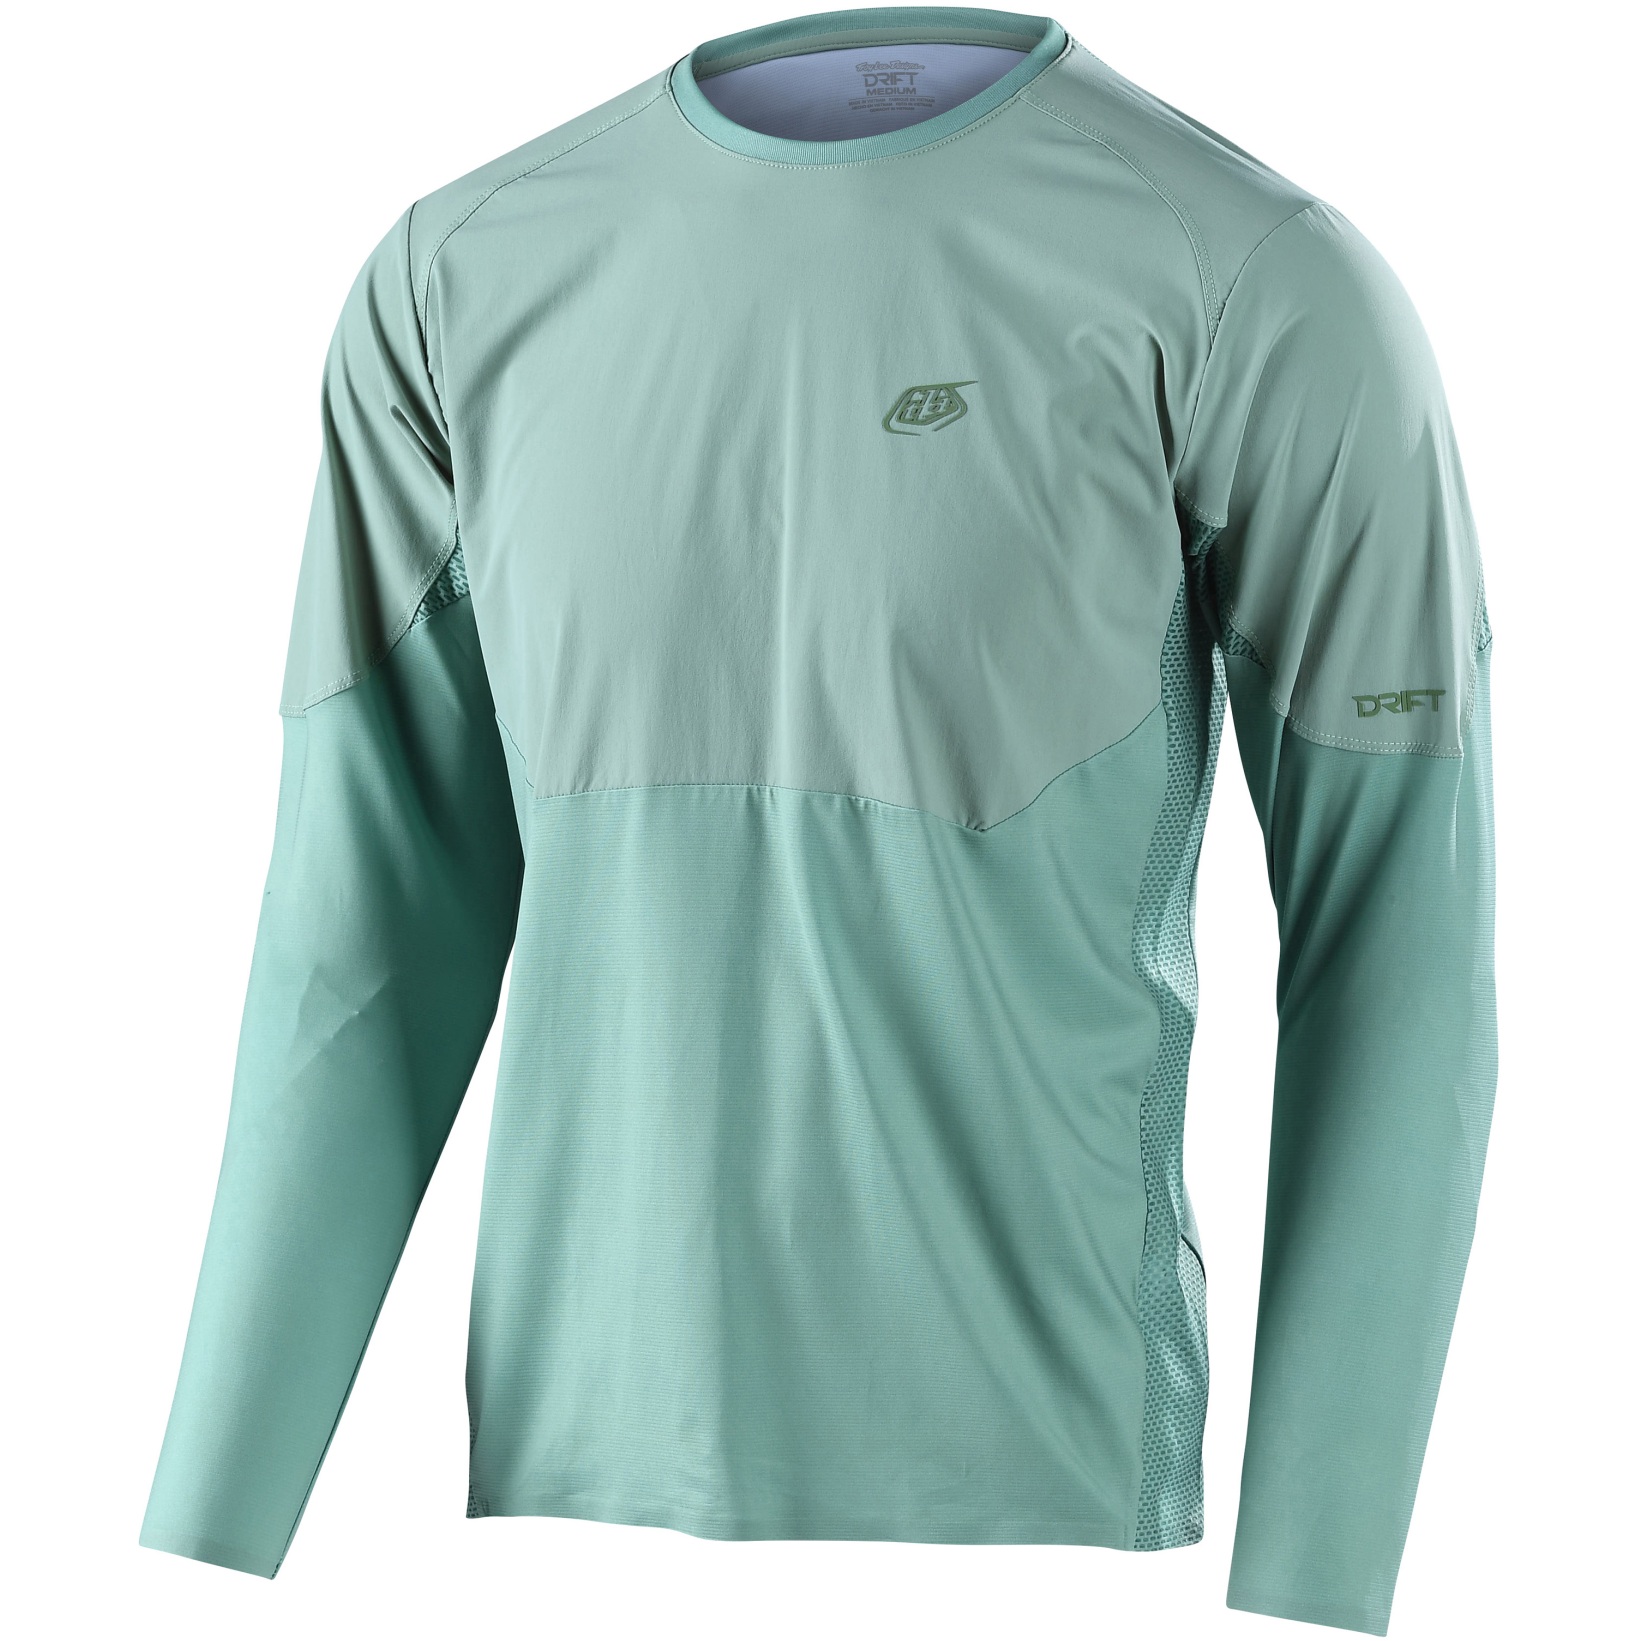 Image of Troy Lee Designs Drift Long Sleeve Jersey - Solid Glass Green